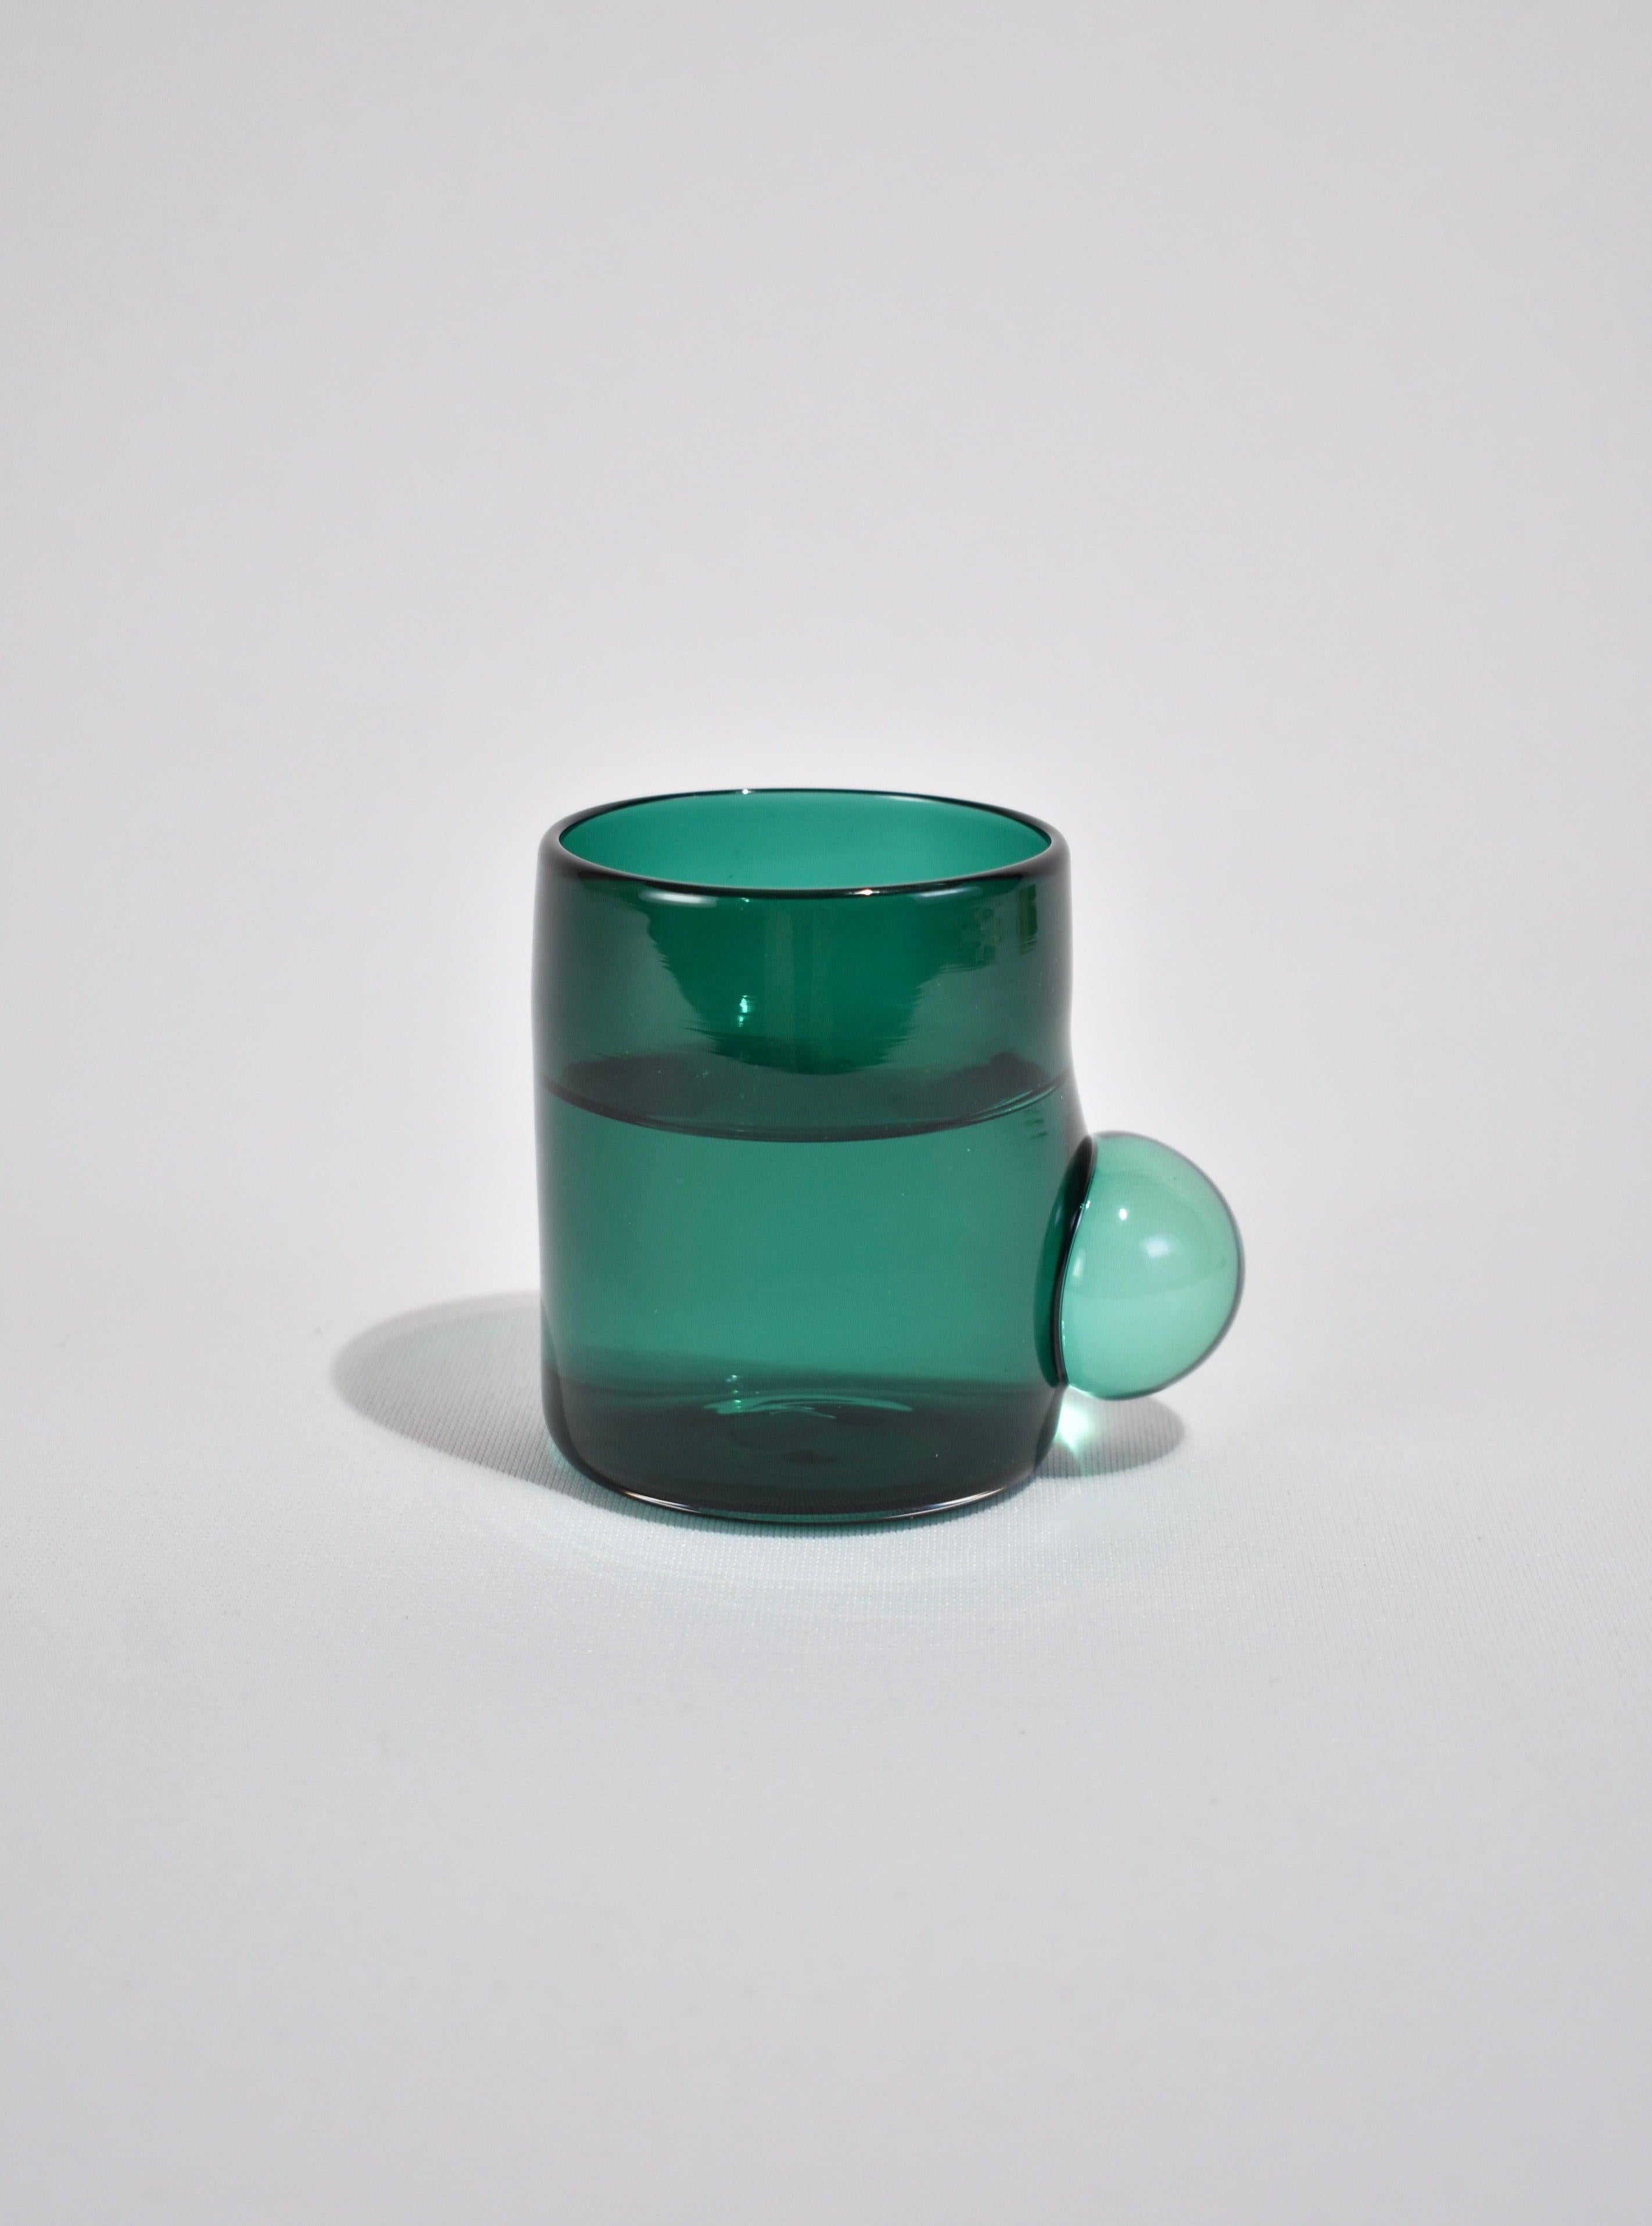 Blown glass tumbler in teal with a clear bubble handle. Perfect size for water, wine, juice, or spirits. Handmade in USA by Grace Whiteside of Sticky Glass.

Please note: Due to the handmade nature of this cup, subtle variations in form and finish